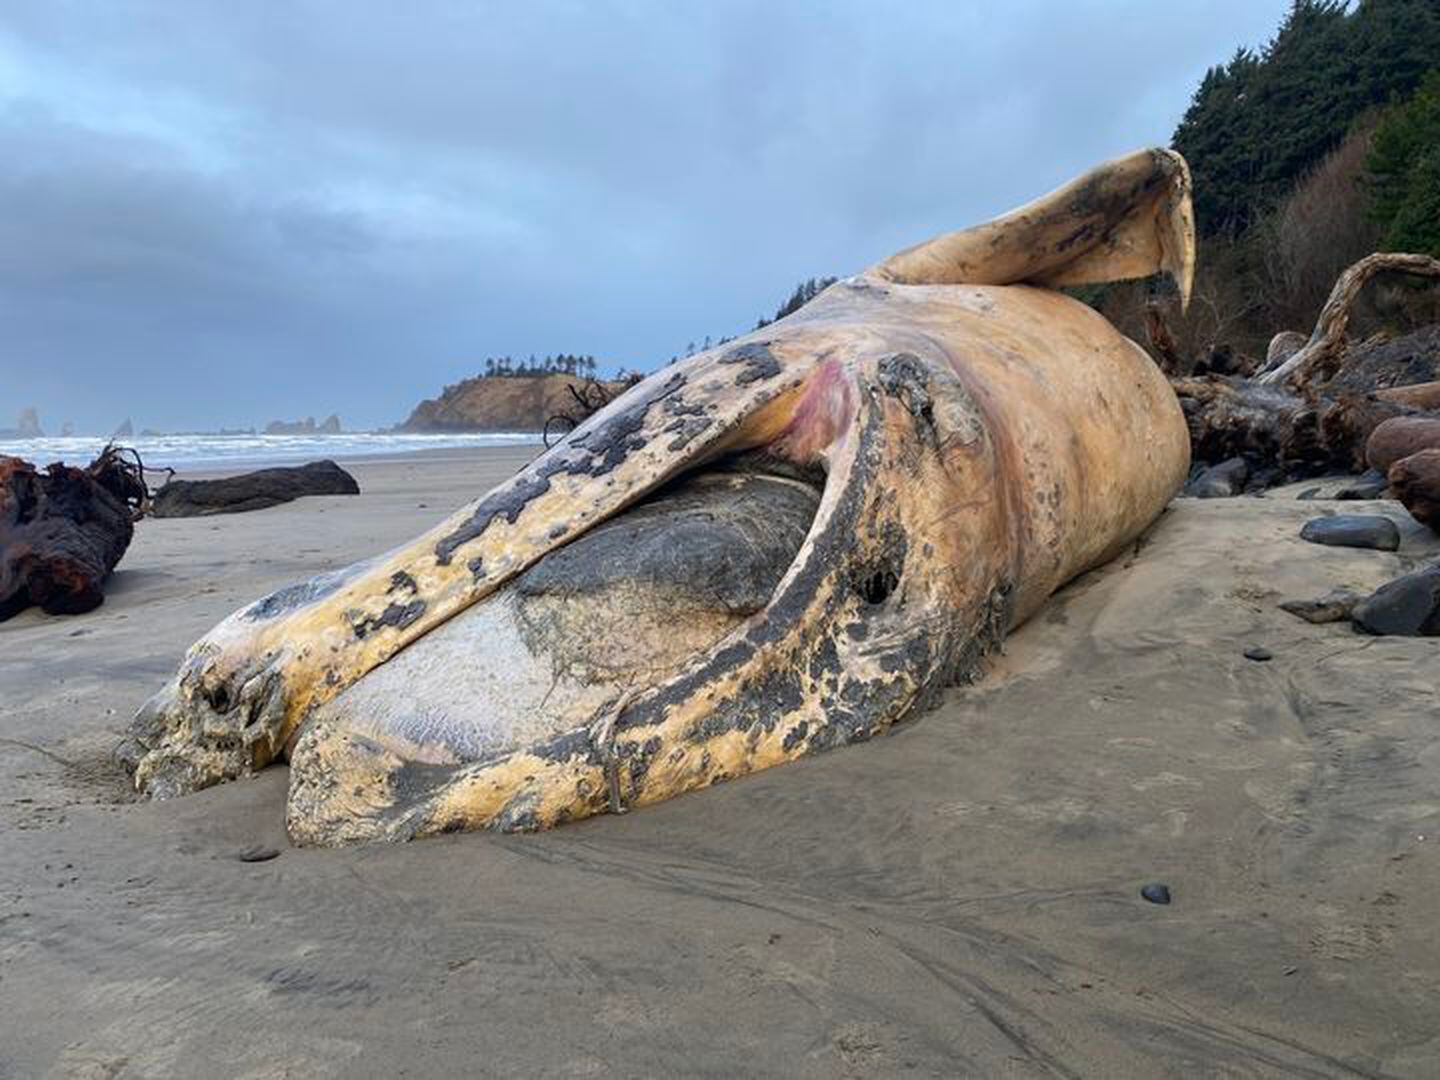 Sperm whale beached in Oregon killed by ship, feds find